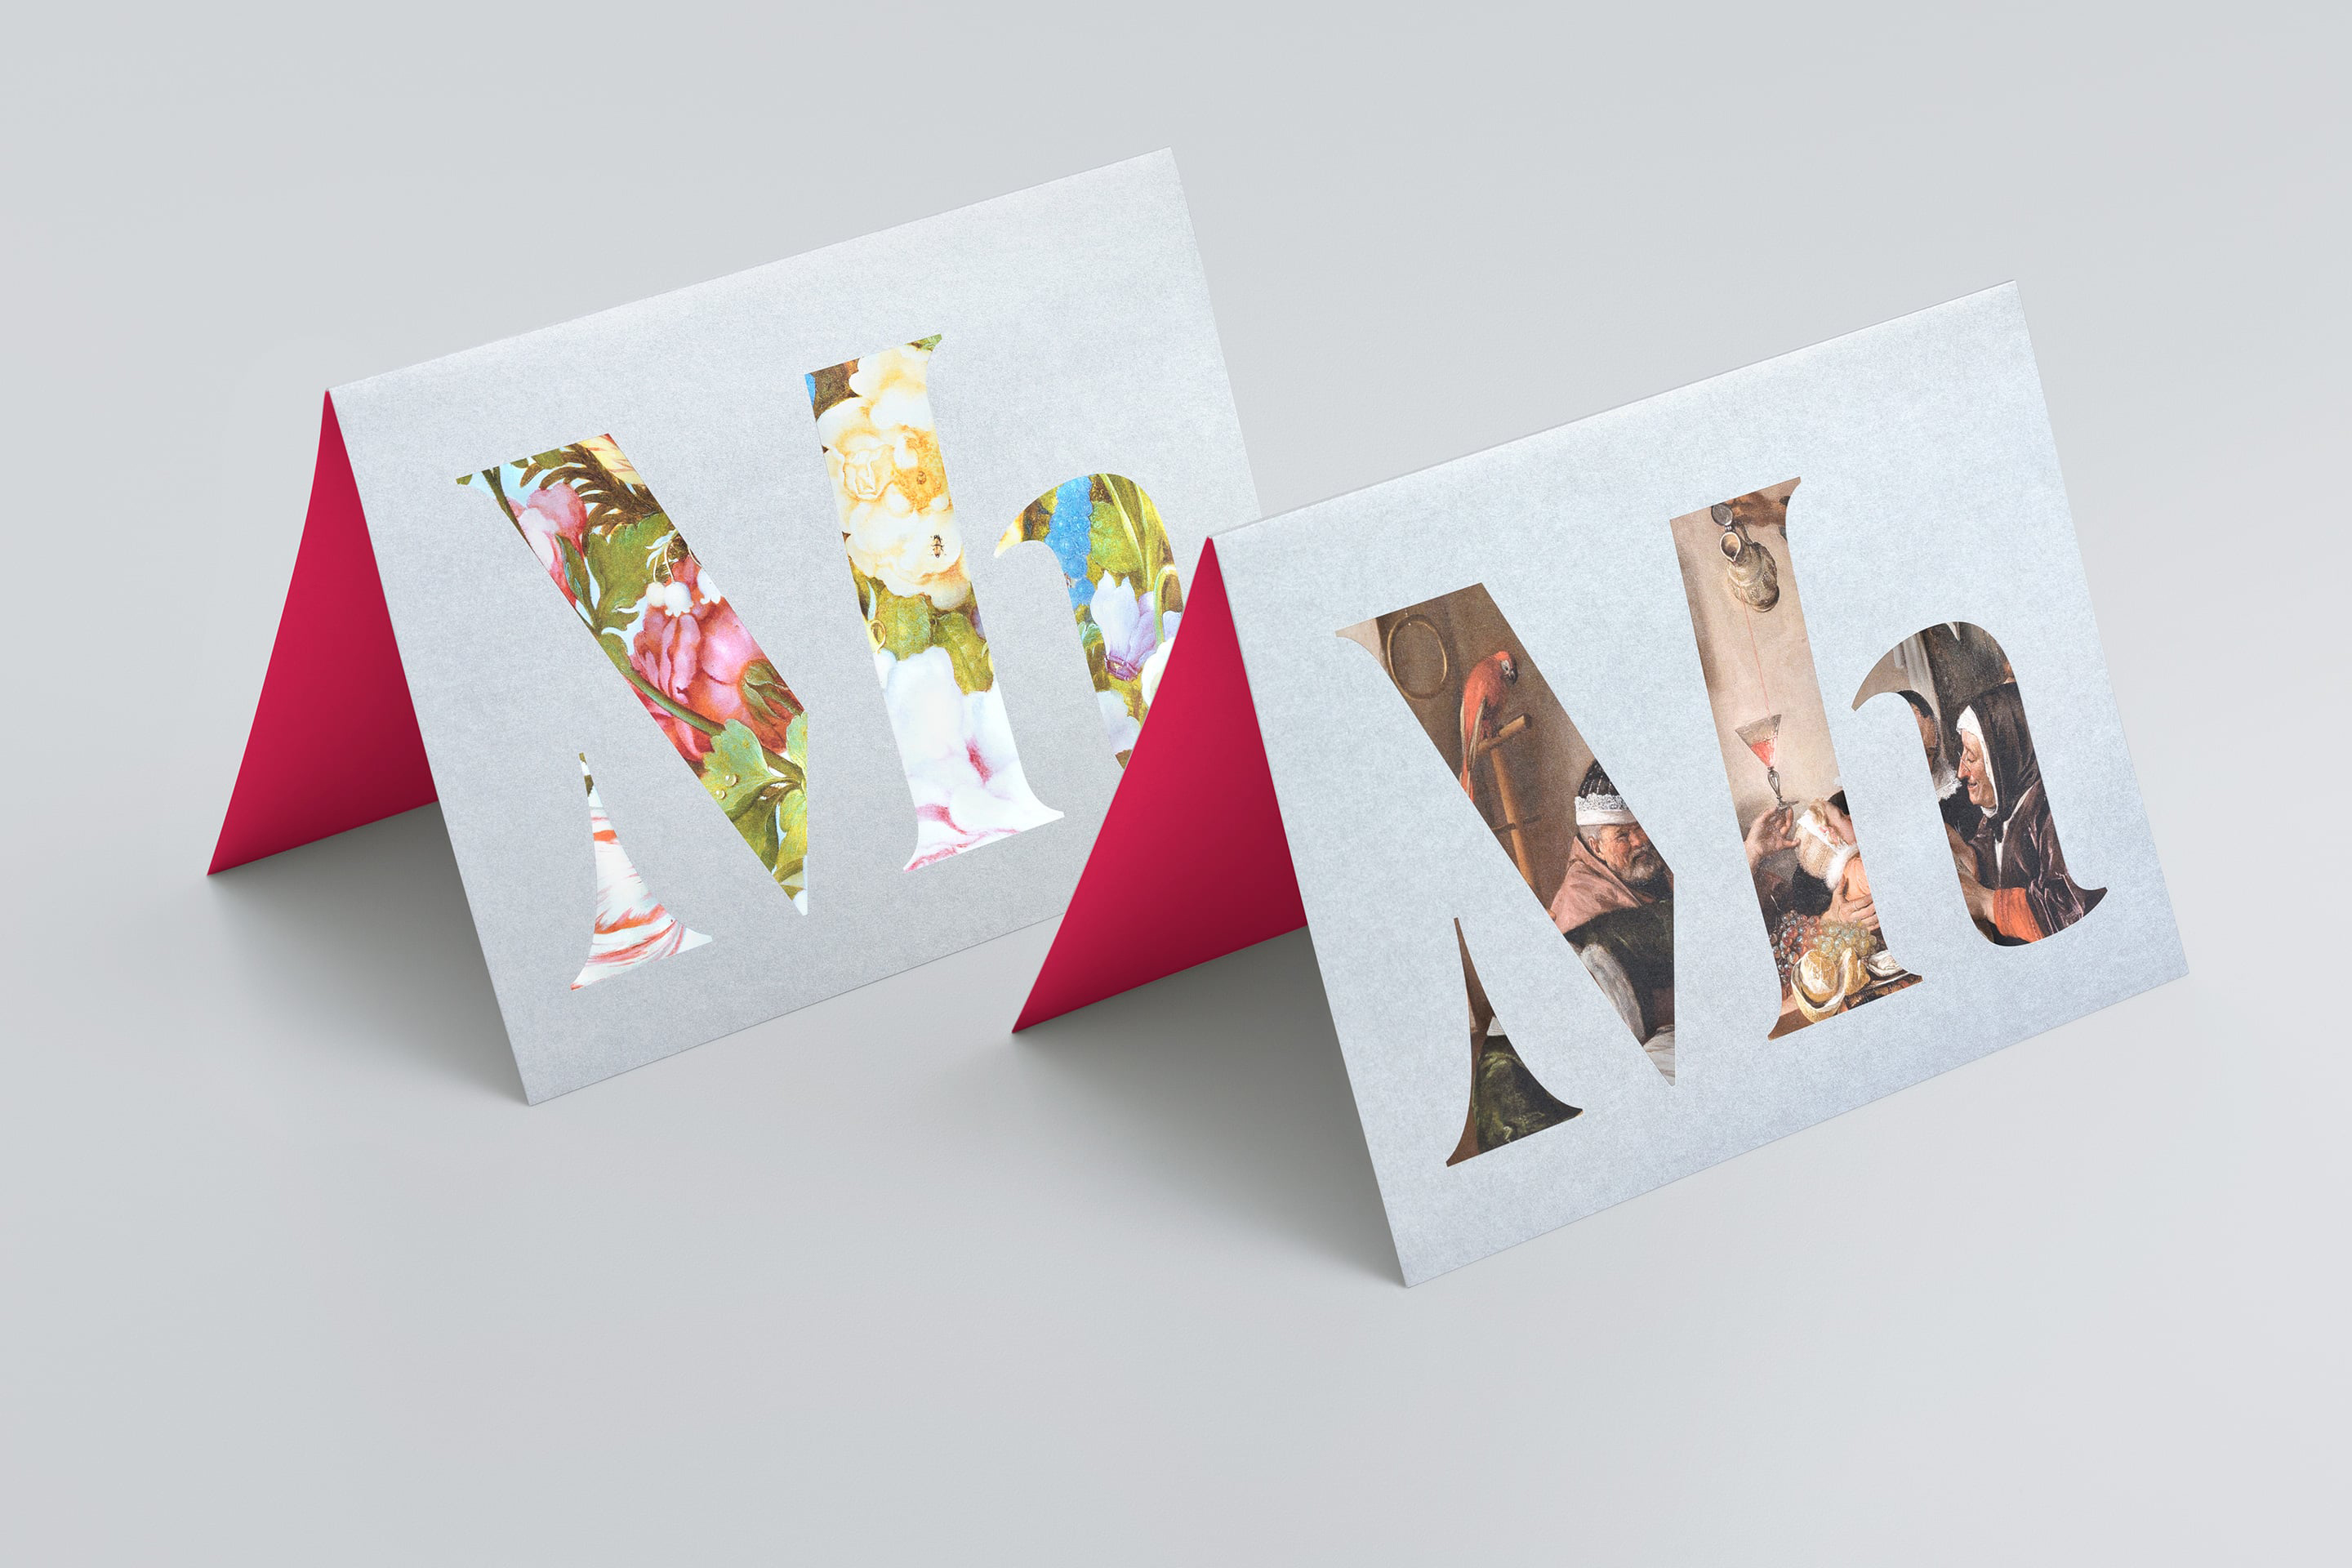 Monogram and print with metallic paper and spot colour detail designed by Dumbar for art museum Mauritshuis